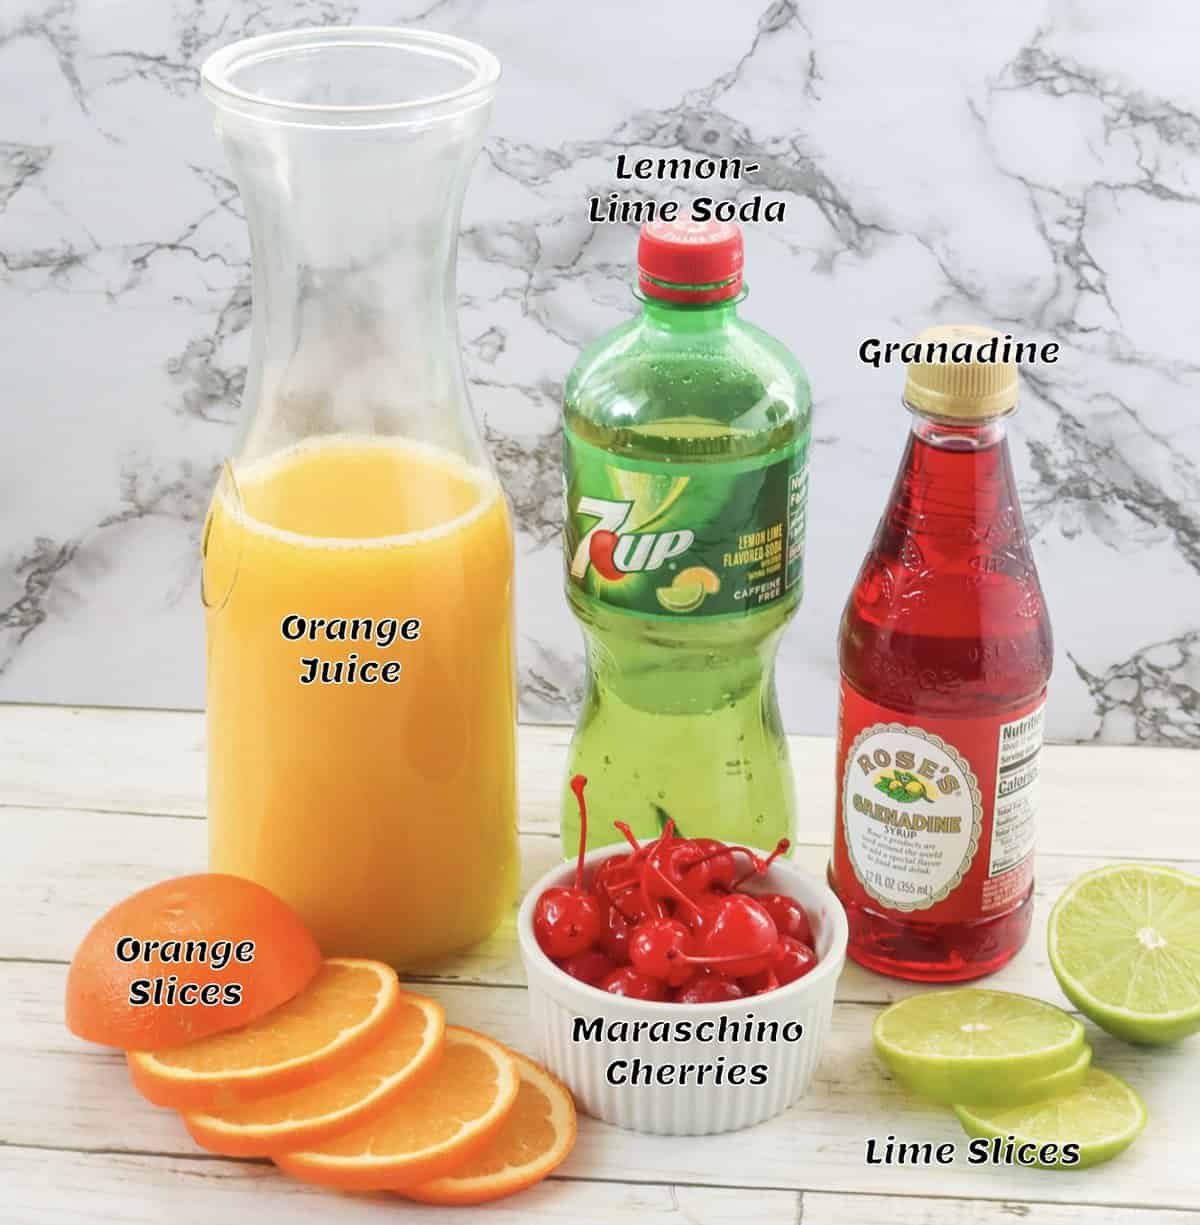 What you need to make this drink